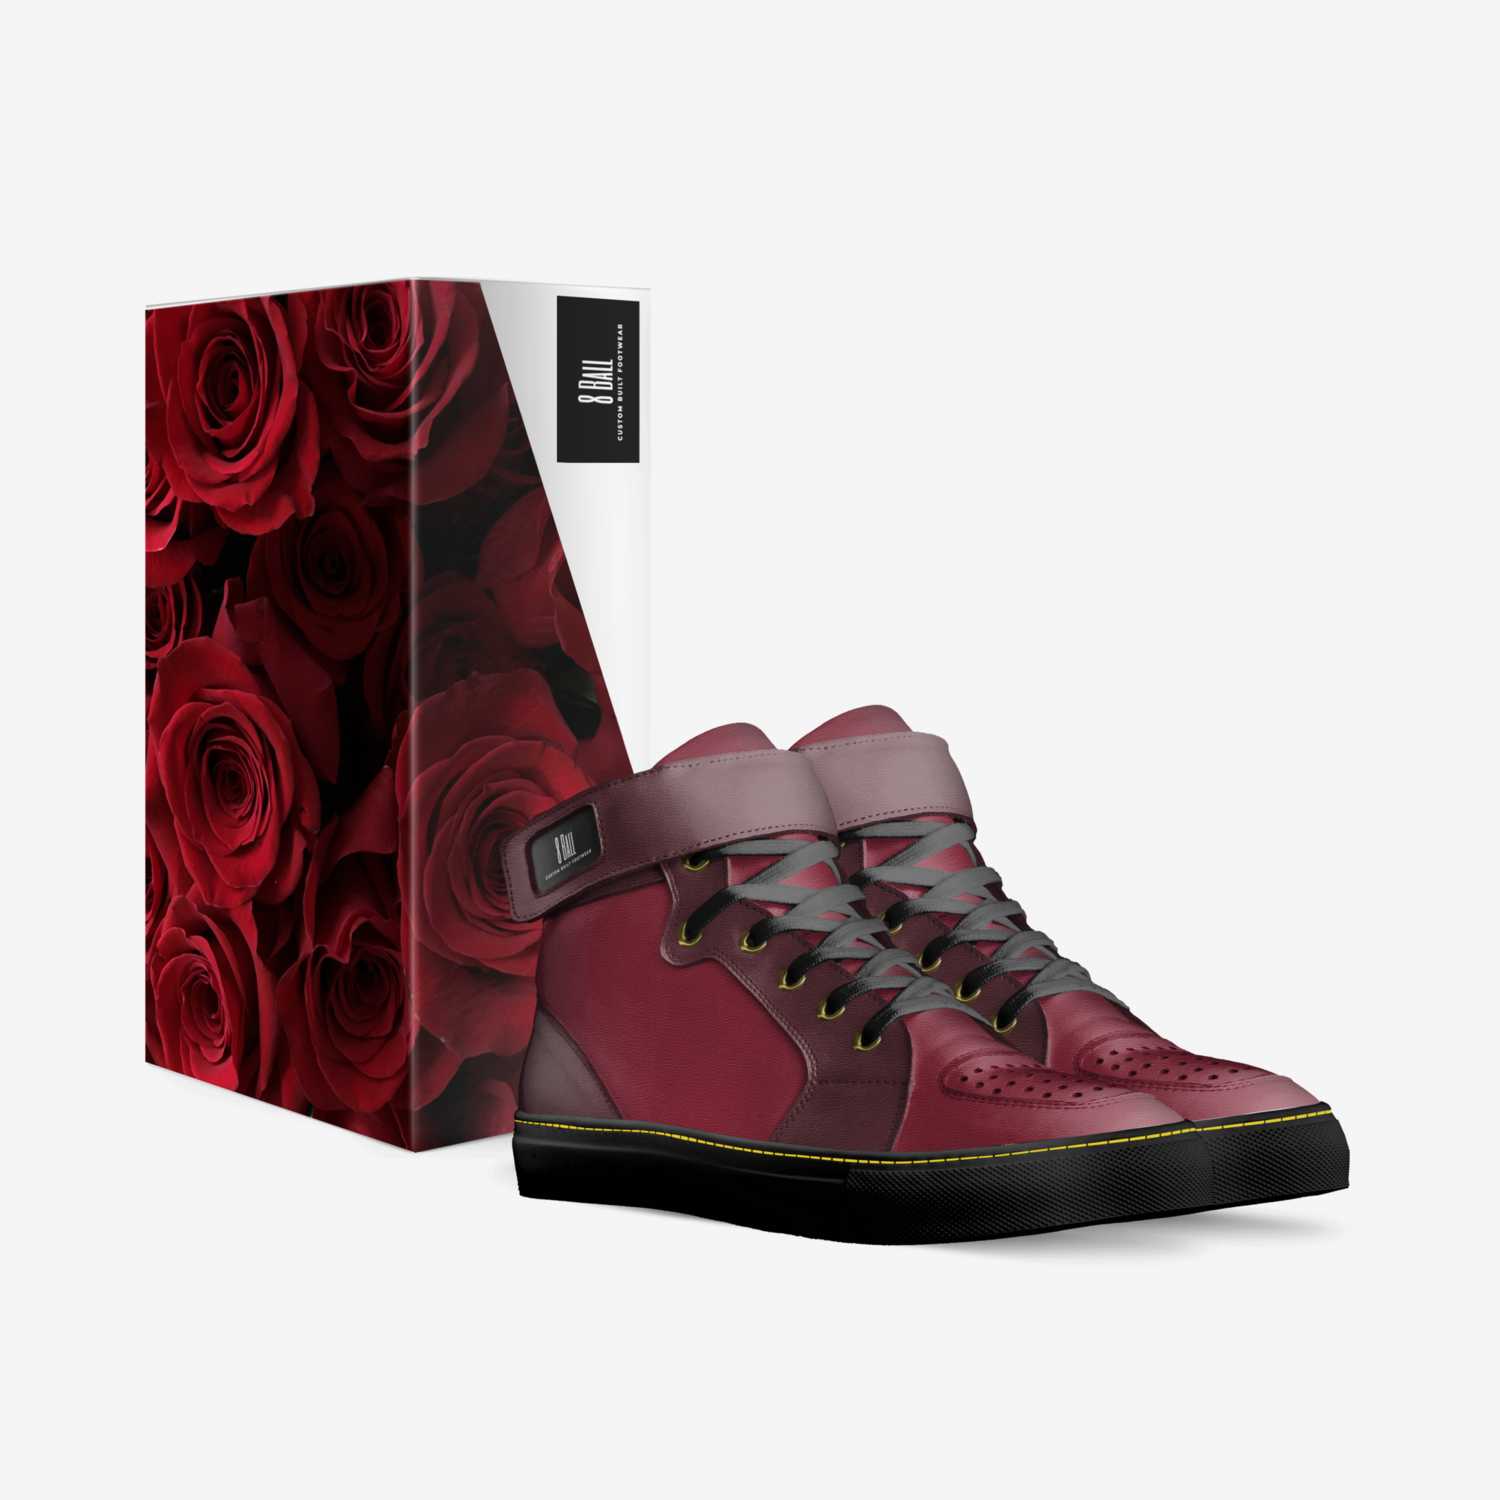 R0s3 custom made in Italy shoes by 8 Ball | Box view